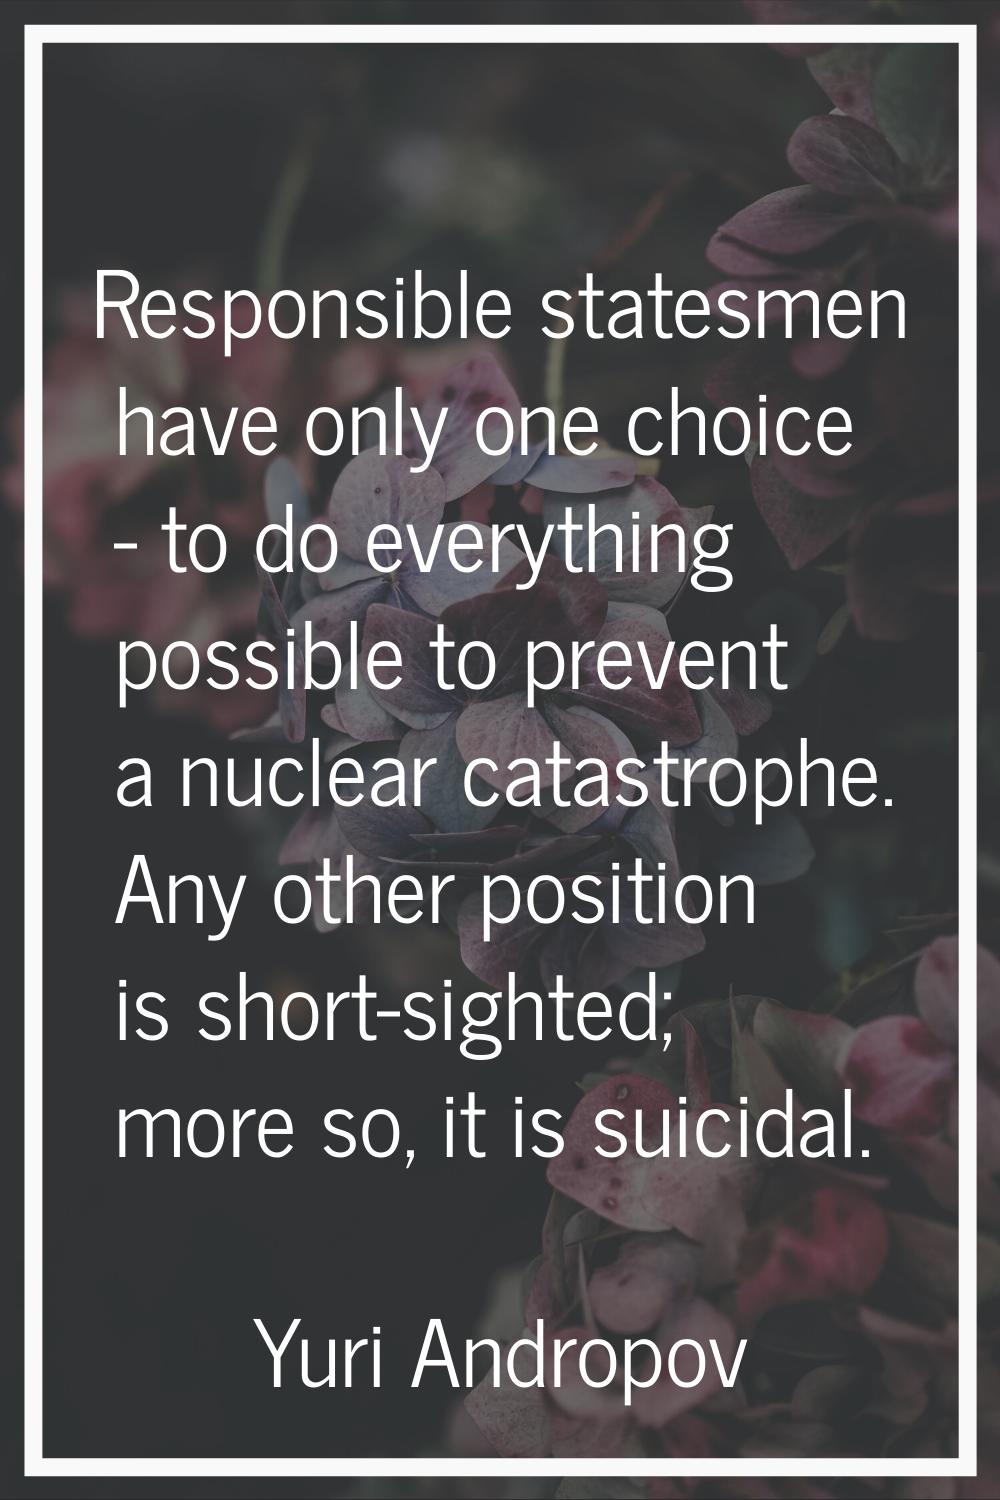 Responsible statesmen have only one choice - to do everything possible to prevent a nuclear catastr